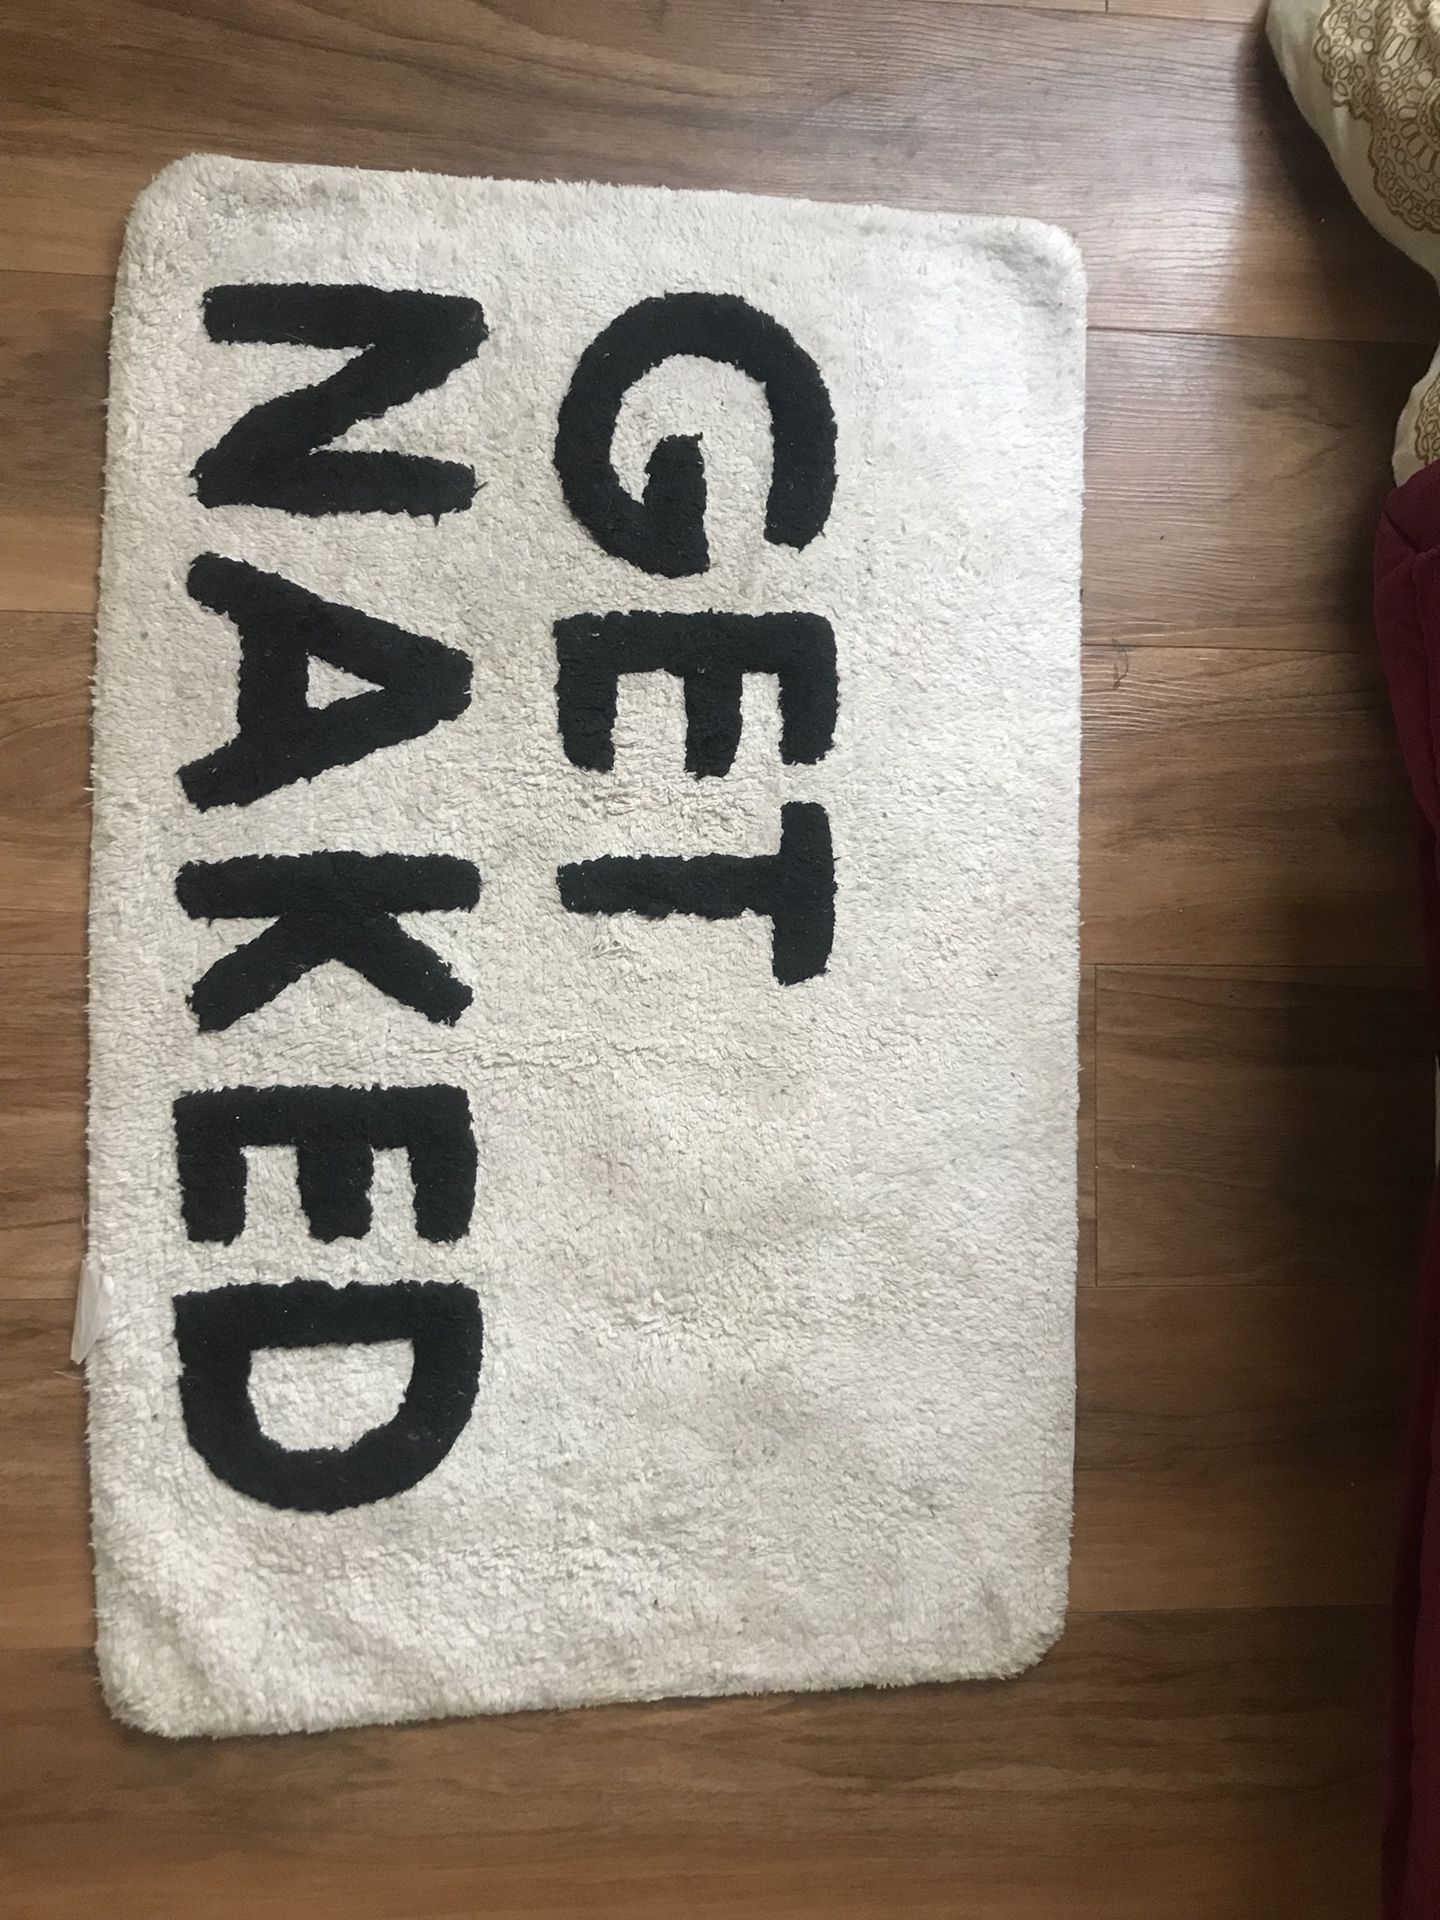 Get Naked Bath Mat | Urban Outfitters